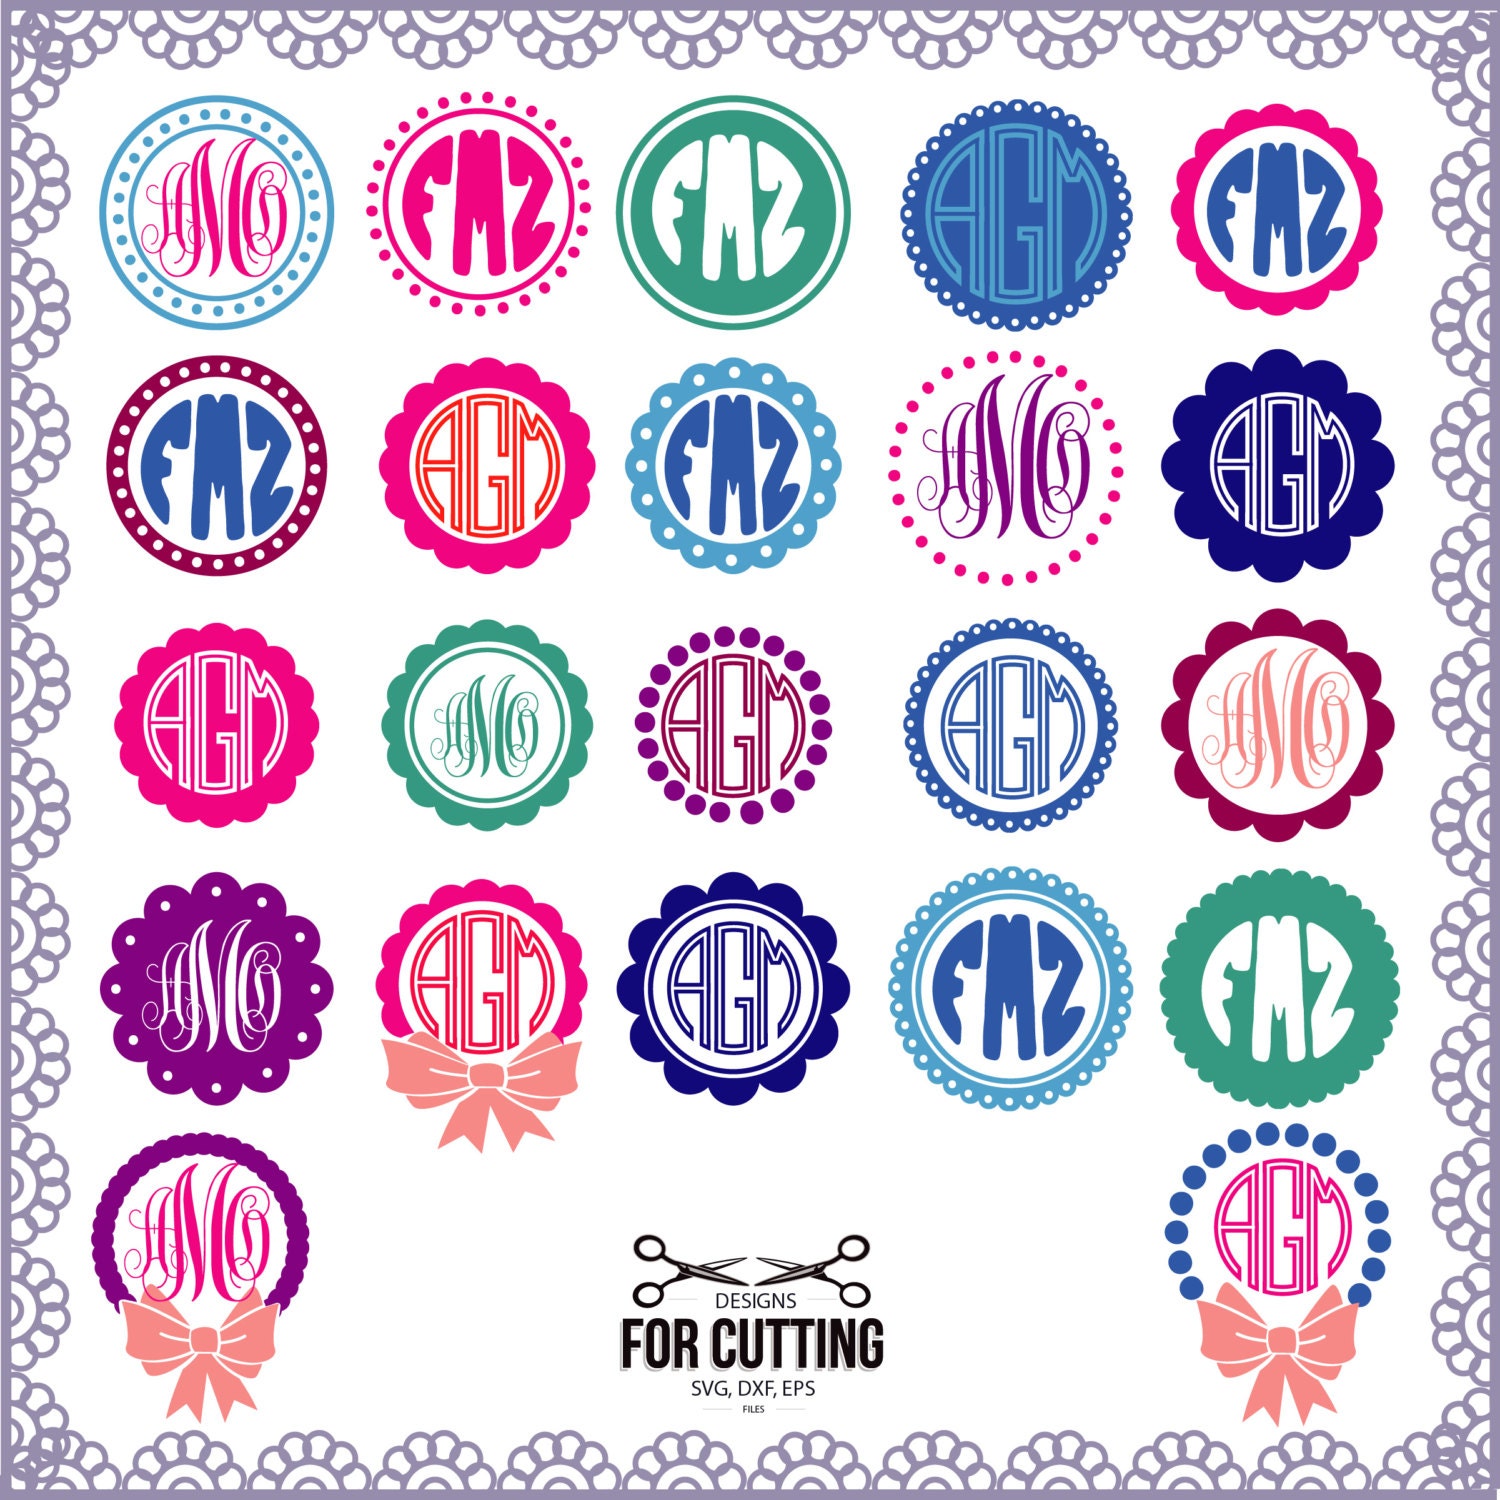 Download Circle pack Monogram frames cut Files SVG DXF EPS. Cutting or